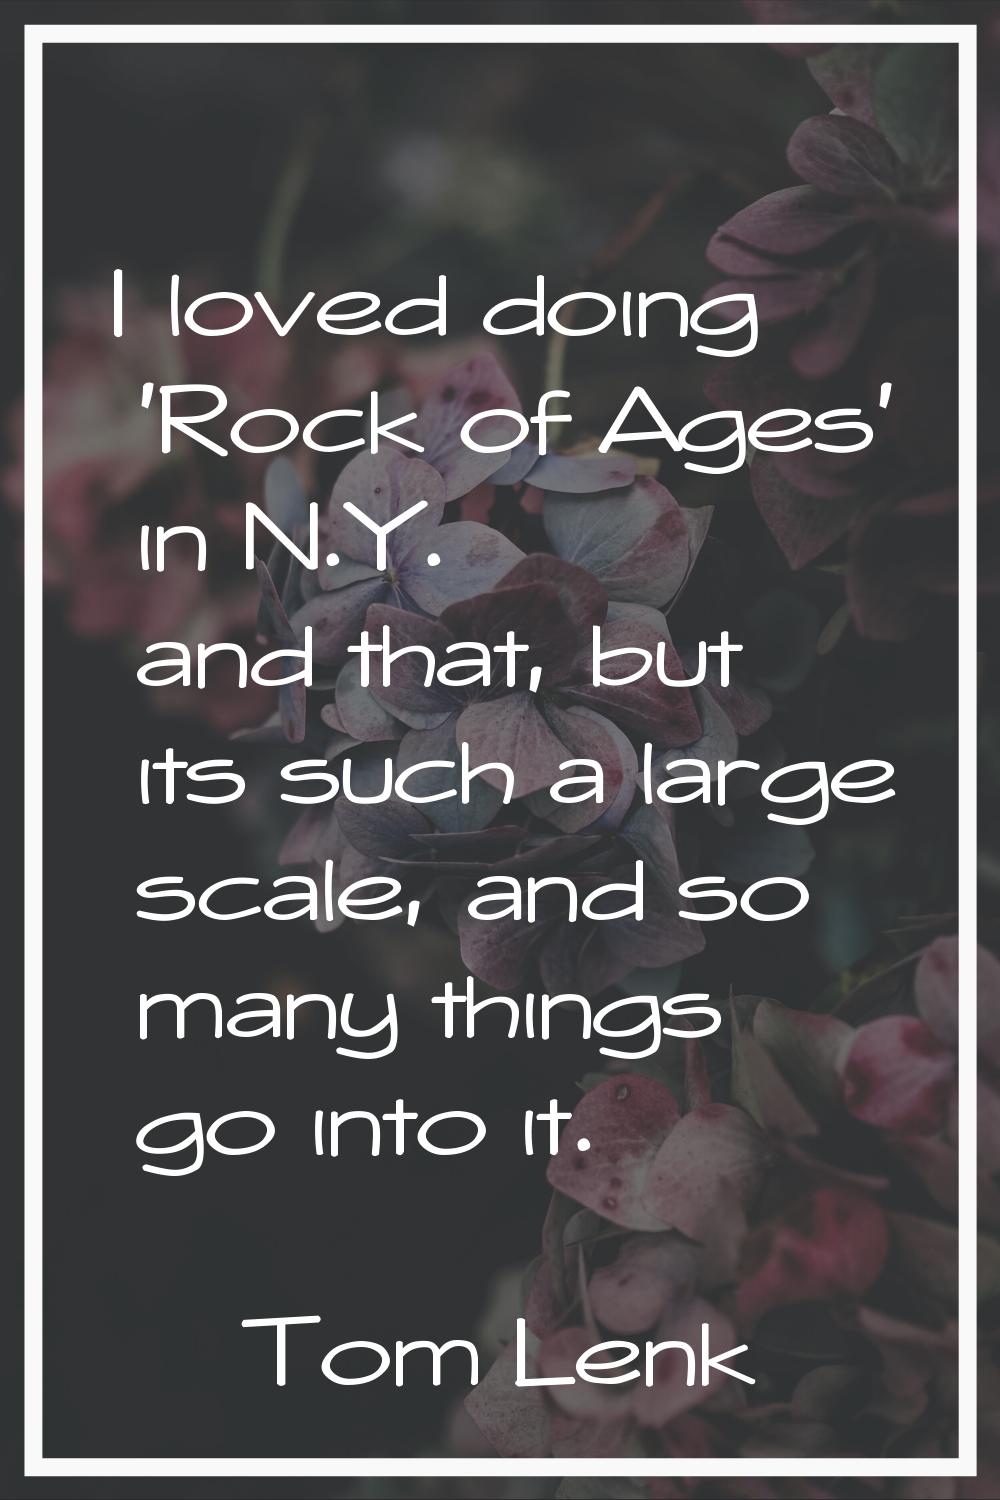 I loved doing 'Rock of Ages' in N.Y. and that, but its such a large scale, and so many things go in